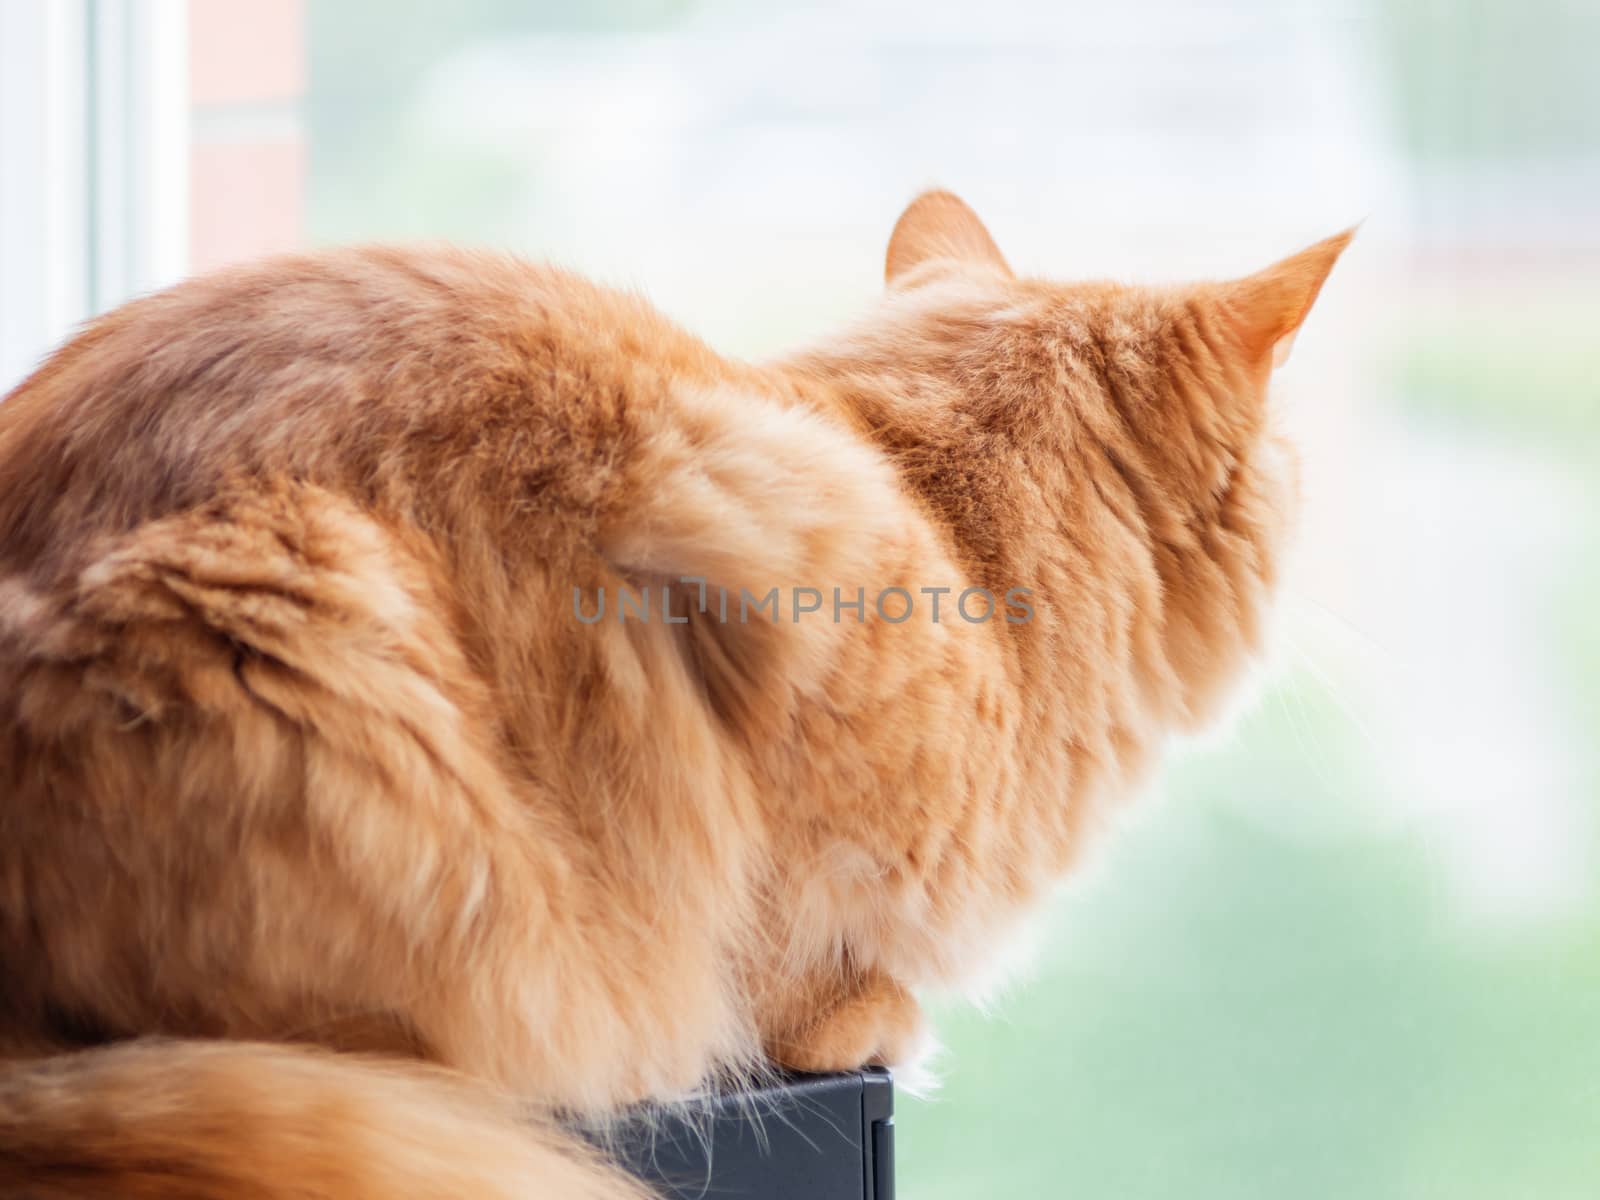 Cute ginger cat is looking out of the window. Fluffy pet is waiting for somebody or something.